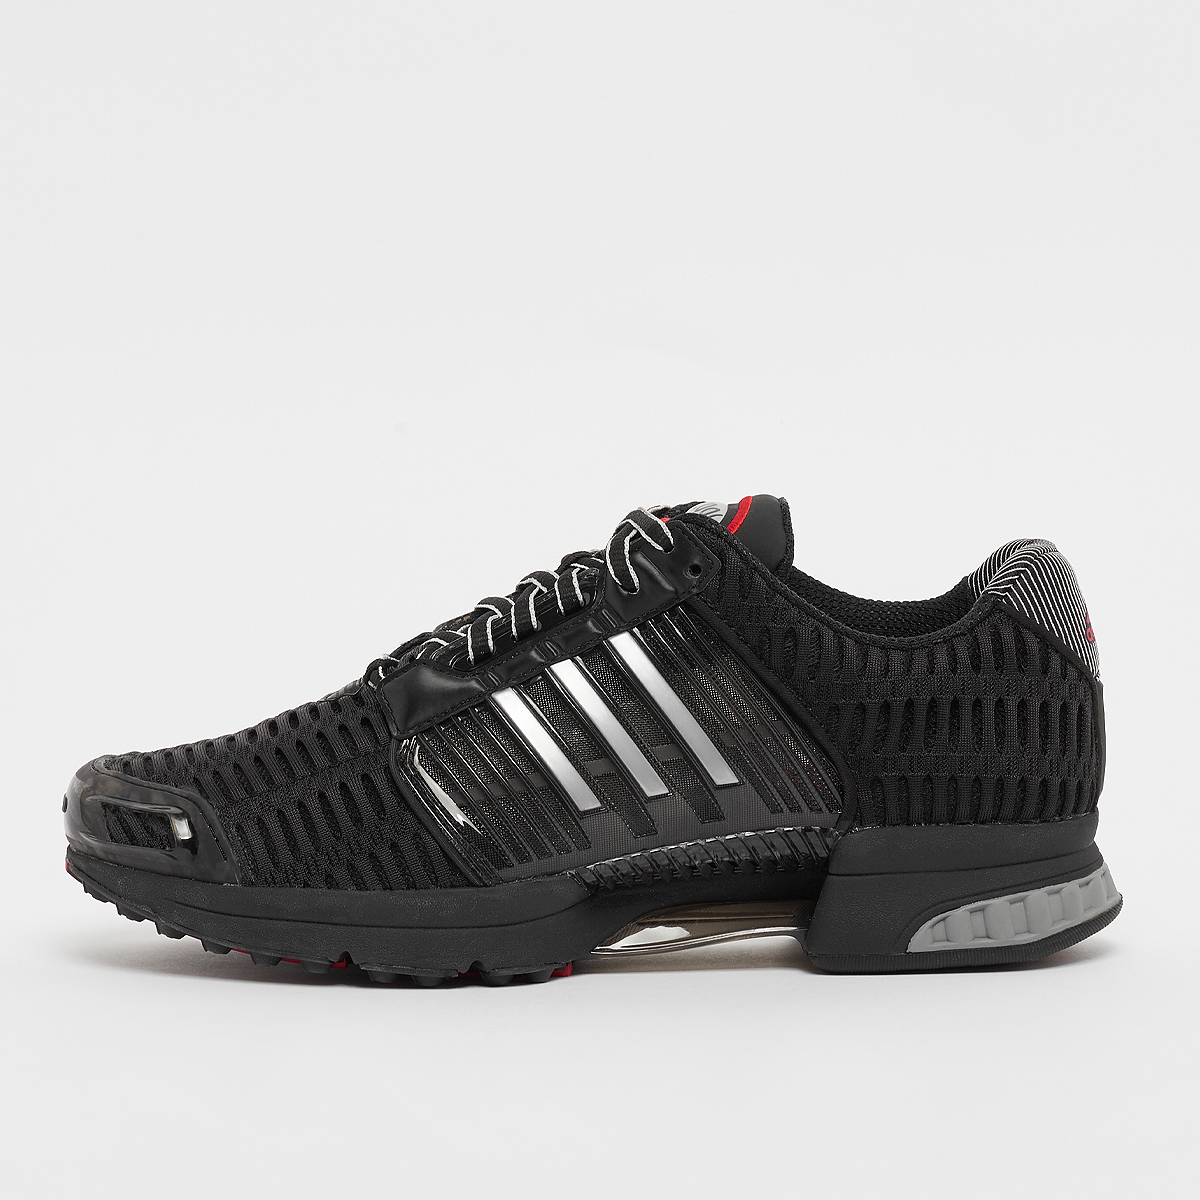 Sneaker Climacool 1, adidas Originals, Footwear, core black/red/core black, taille: 42 2/3